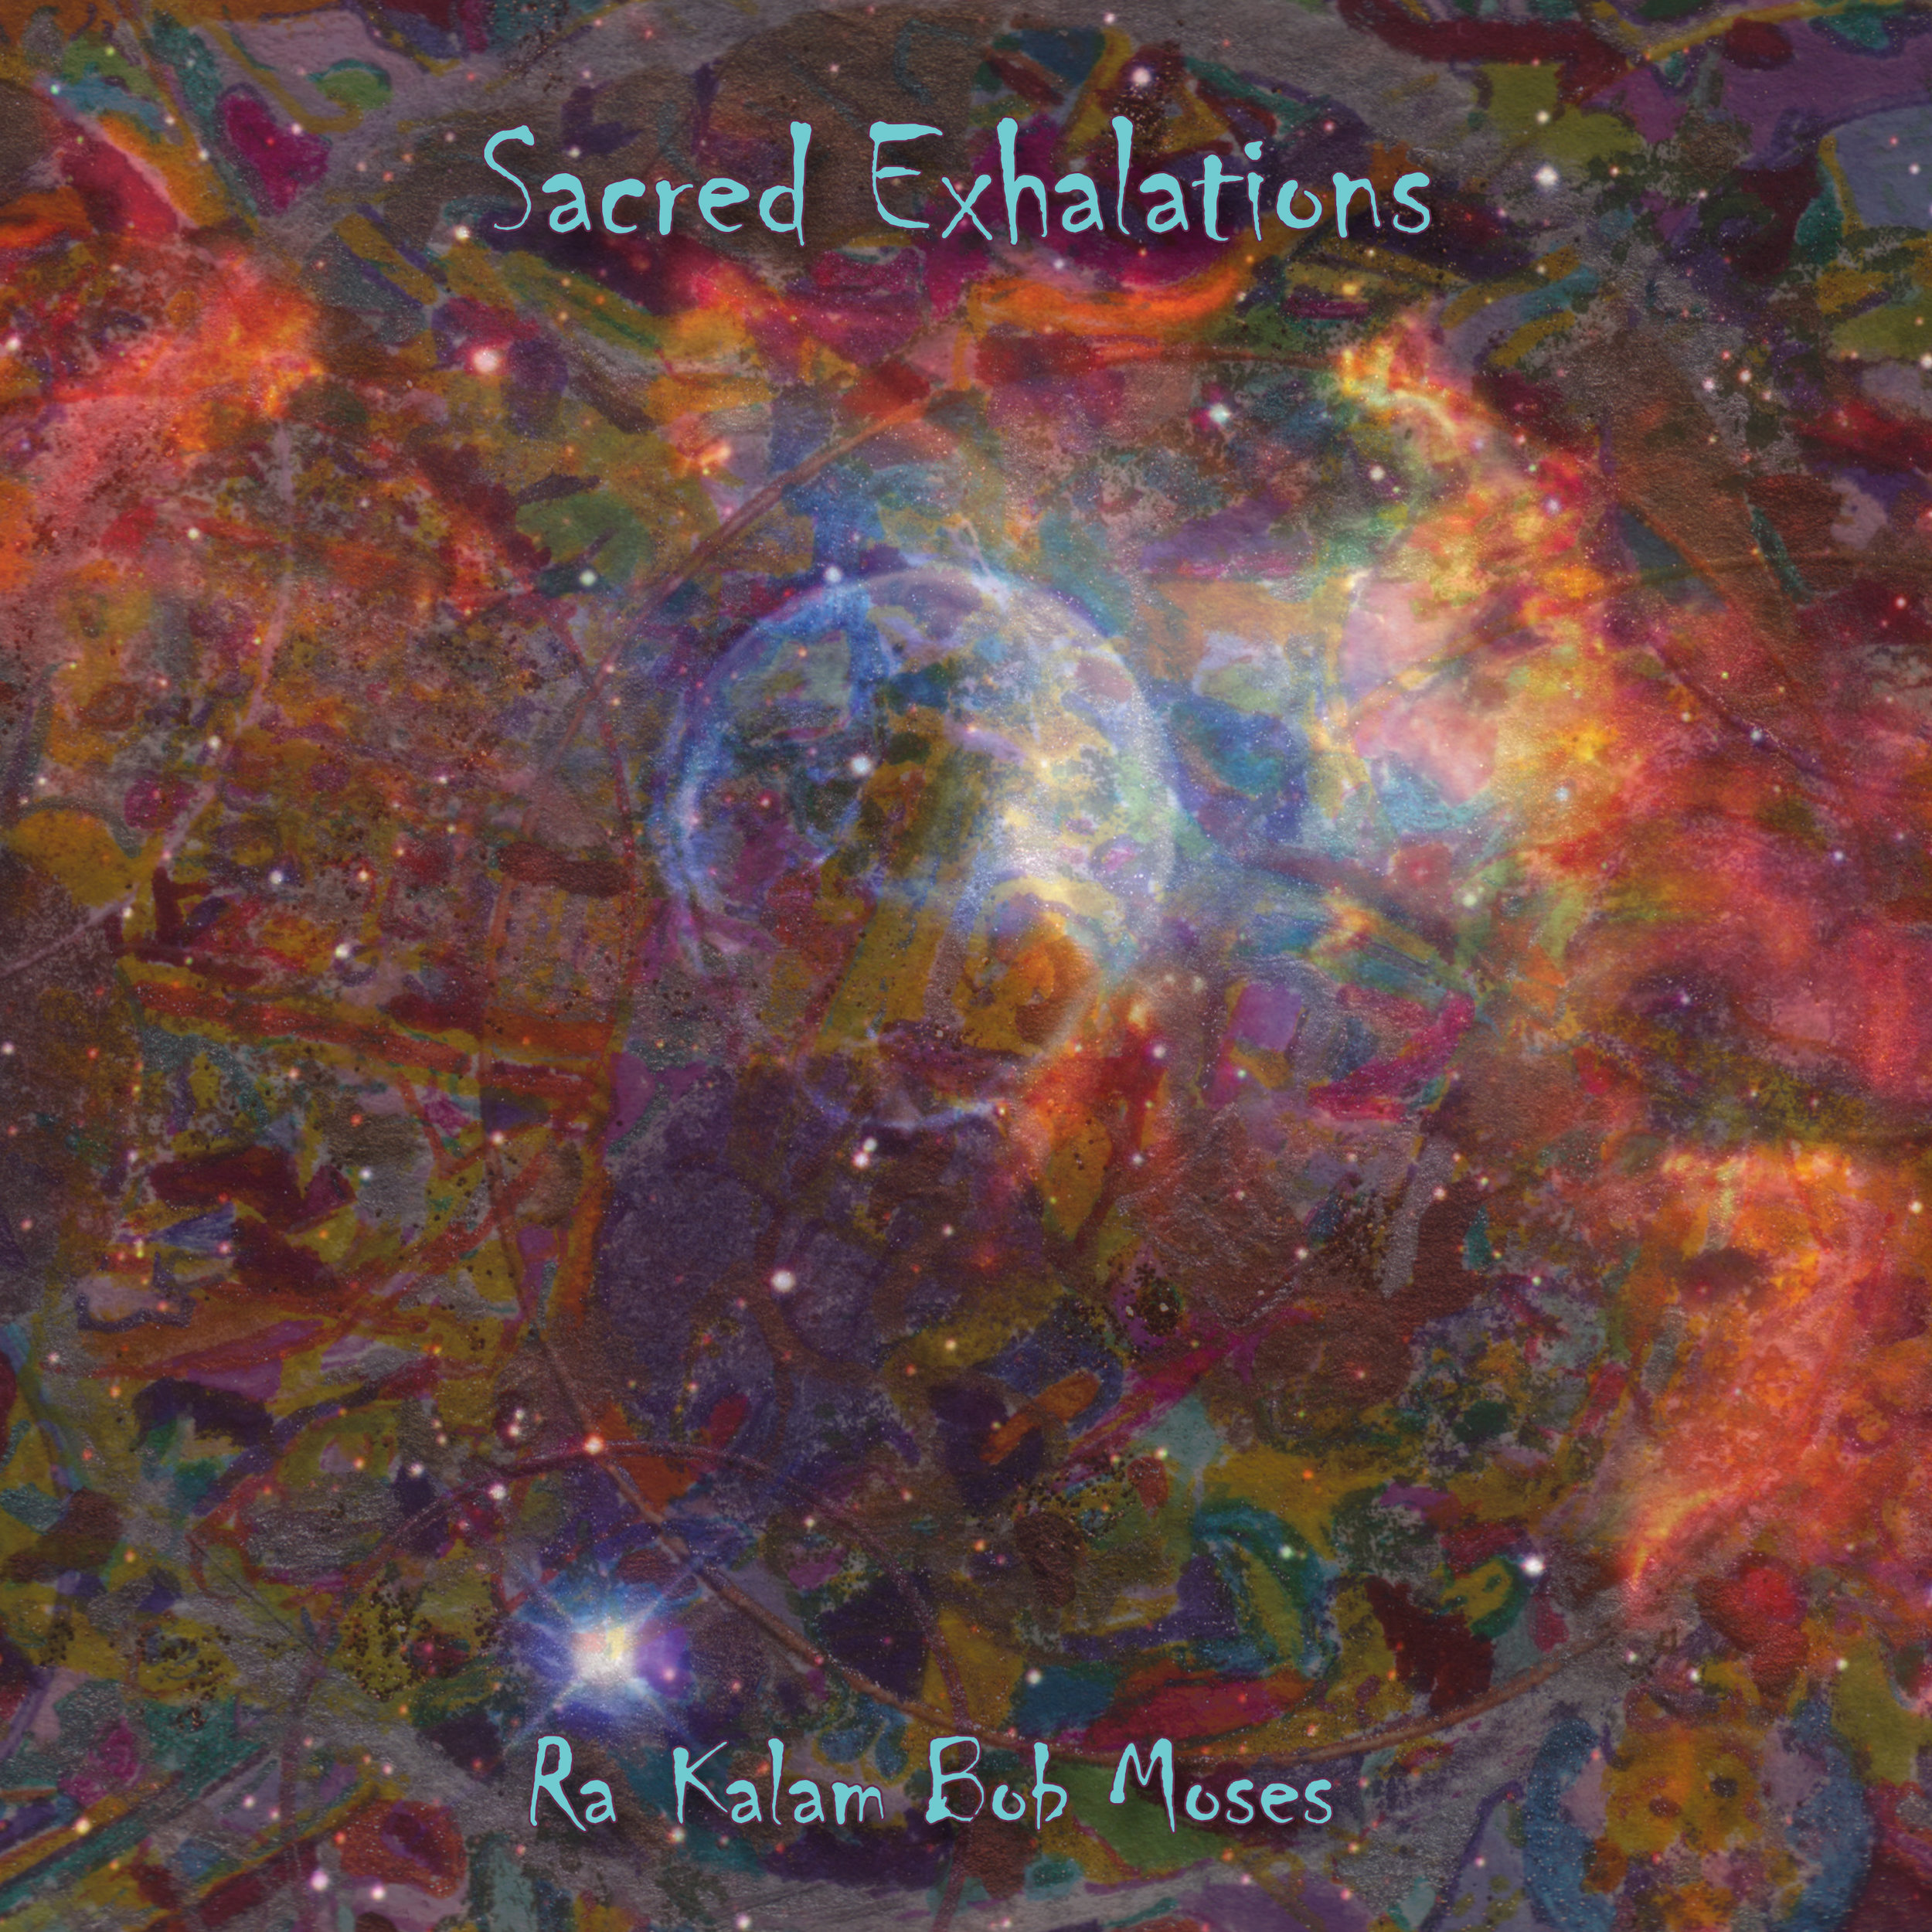   SACRED EXHALATIONS    Compact Disc -    E-mail your order     Digital Downloads -    Amazon     Release date - 2012    Label - Ra Kalam Records    Stan Strickland -Tenor saxophone, bass clarinet, vocals    Raqib Hassan - Tenor saxophone, musette, t